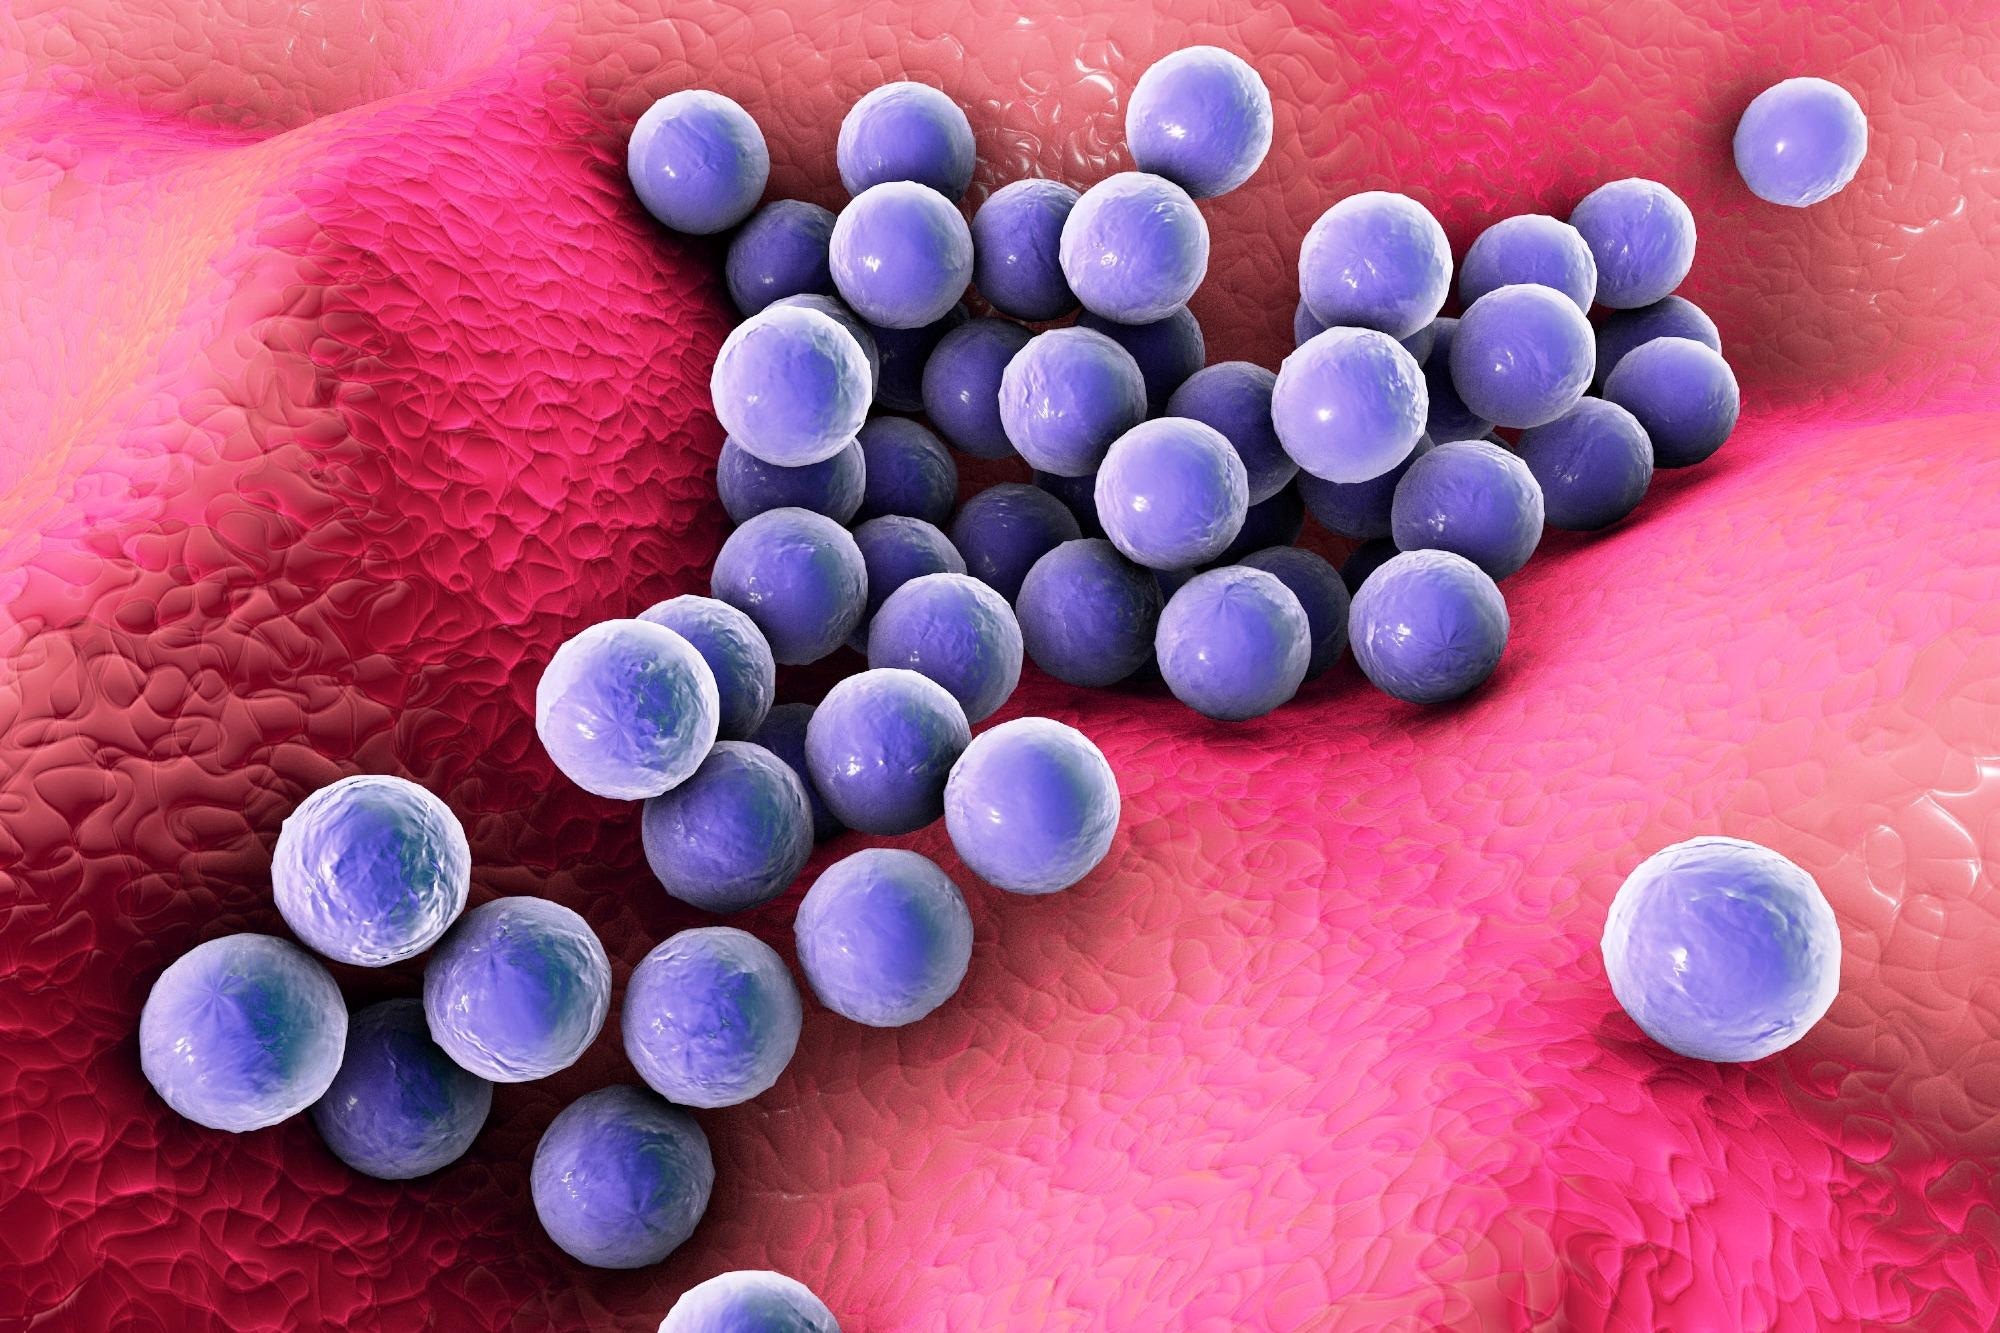 Study: Prevalence of Bacterial Coinfection and Patterns of Antibiotics Prescribing in Patients with COVID-19: A Systematic review and Meta-Analysis. Image Credit: Kateryna Kon / Shutterstock